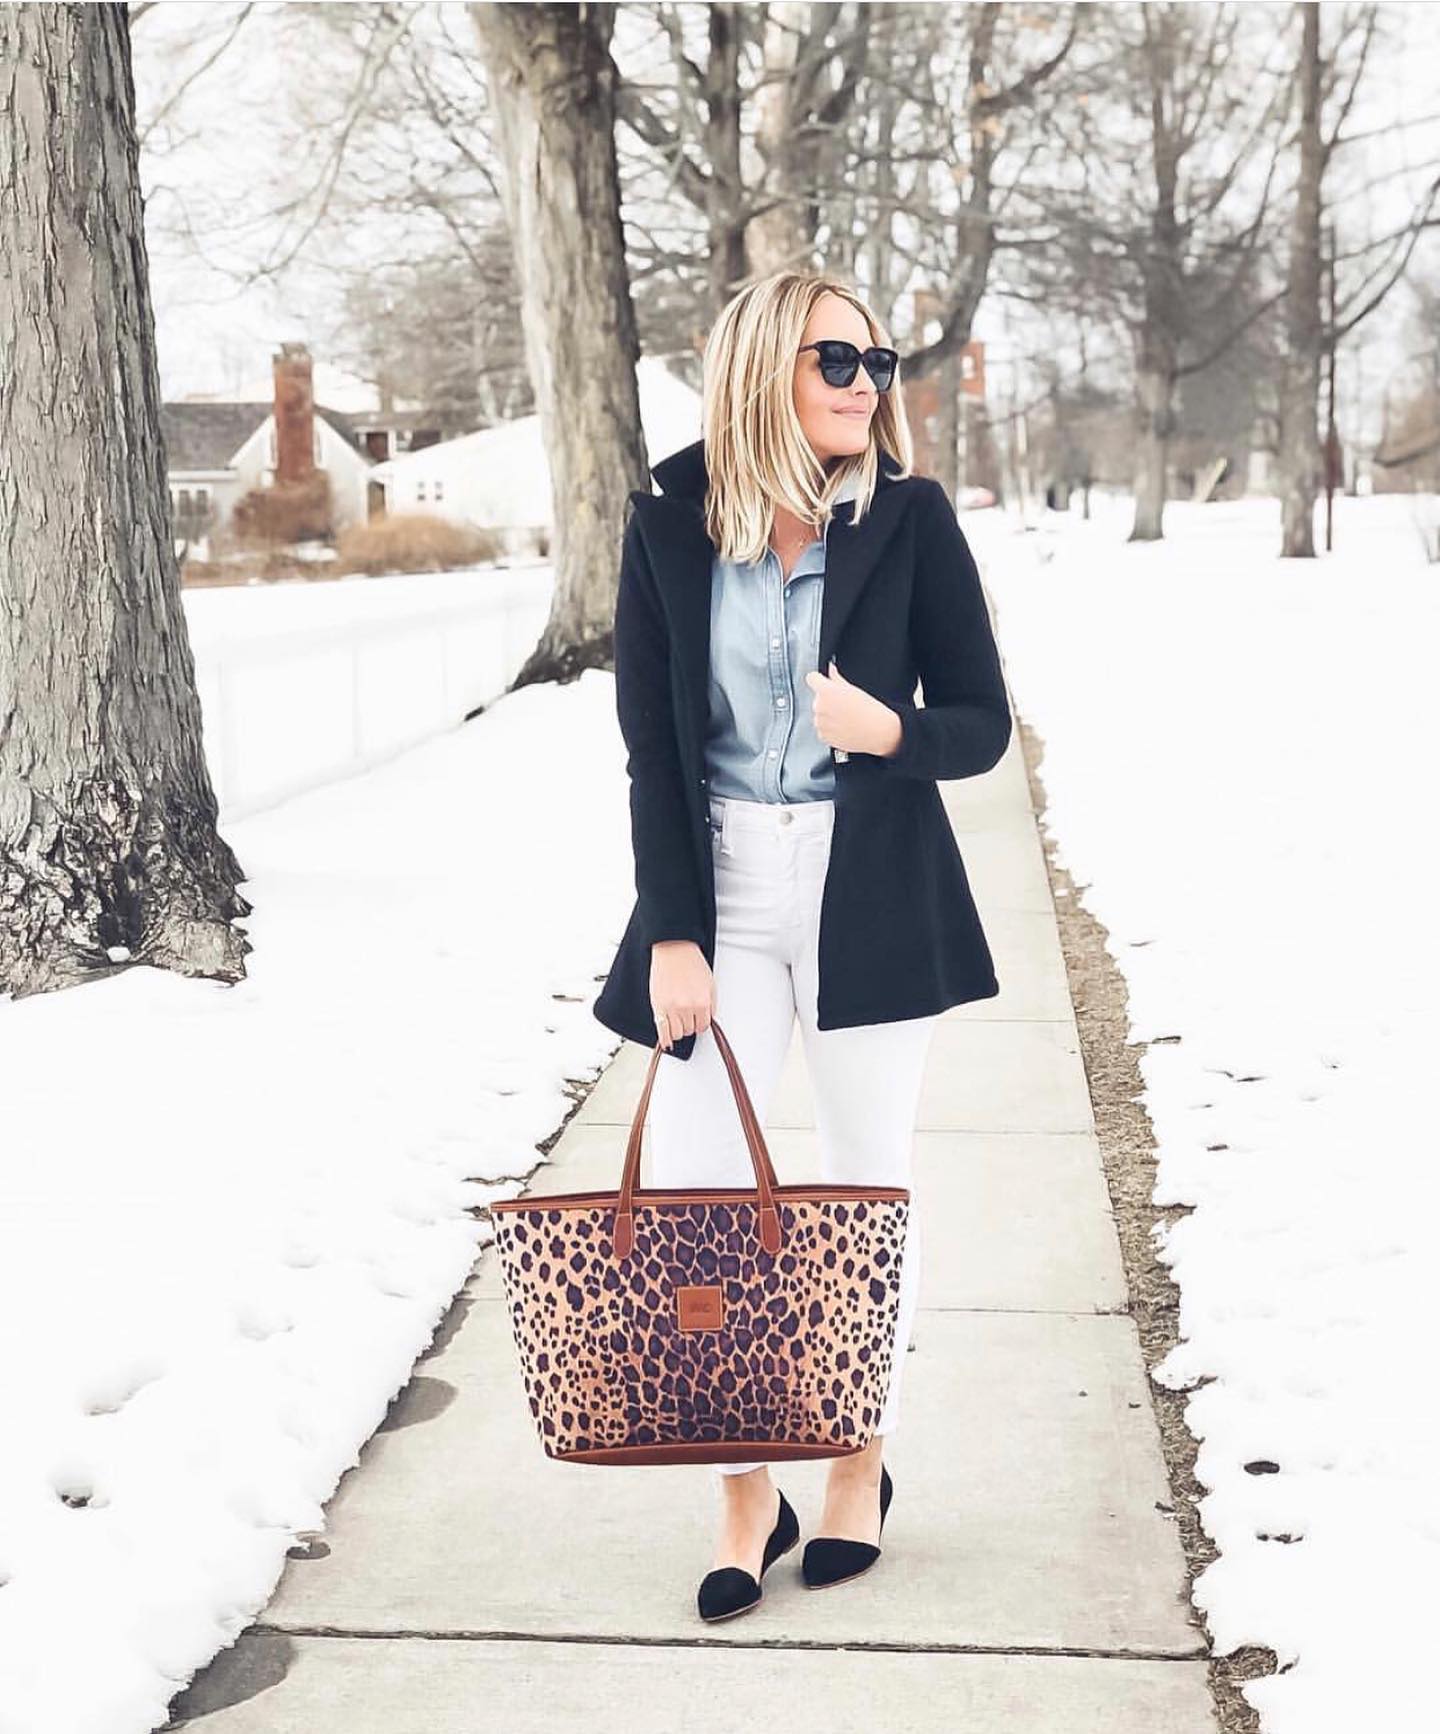 Elegant winter fashion with a tailored black coat, white pants, and a standout leopard print personalized handbag